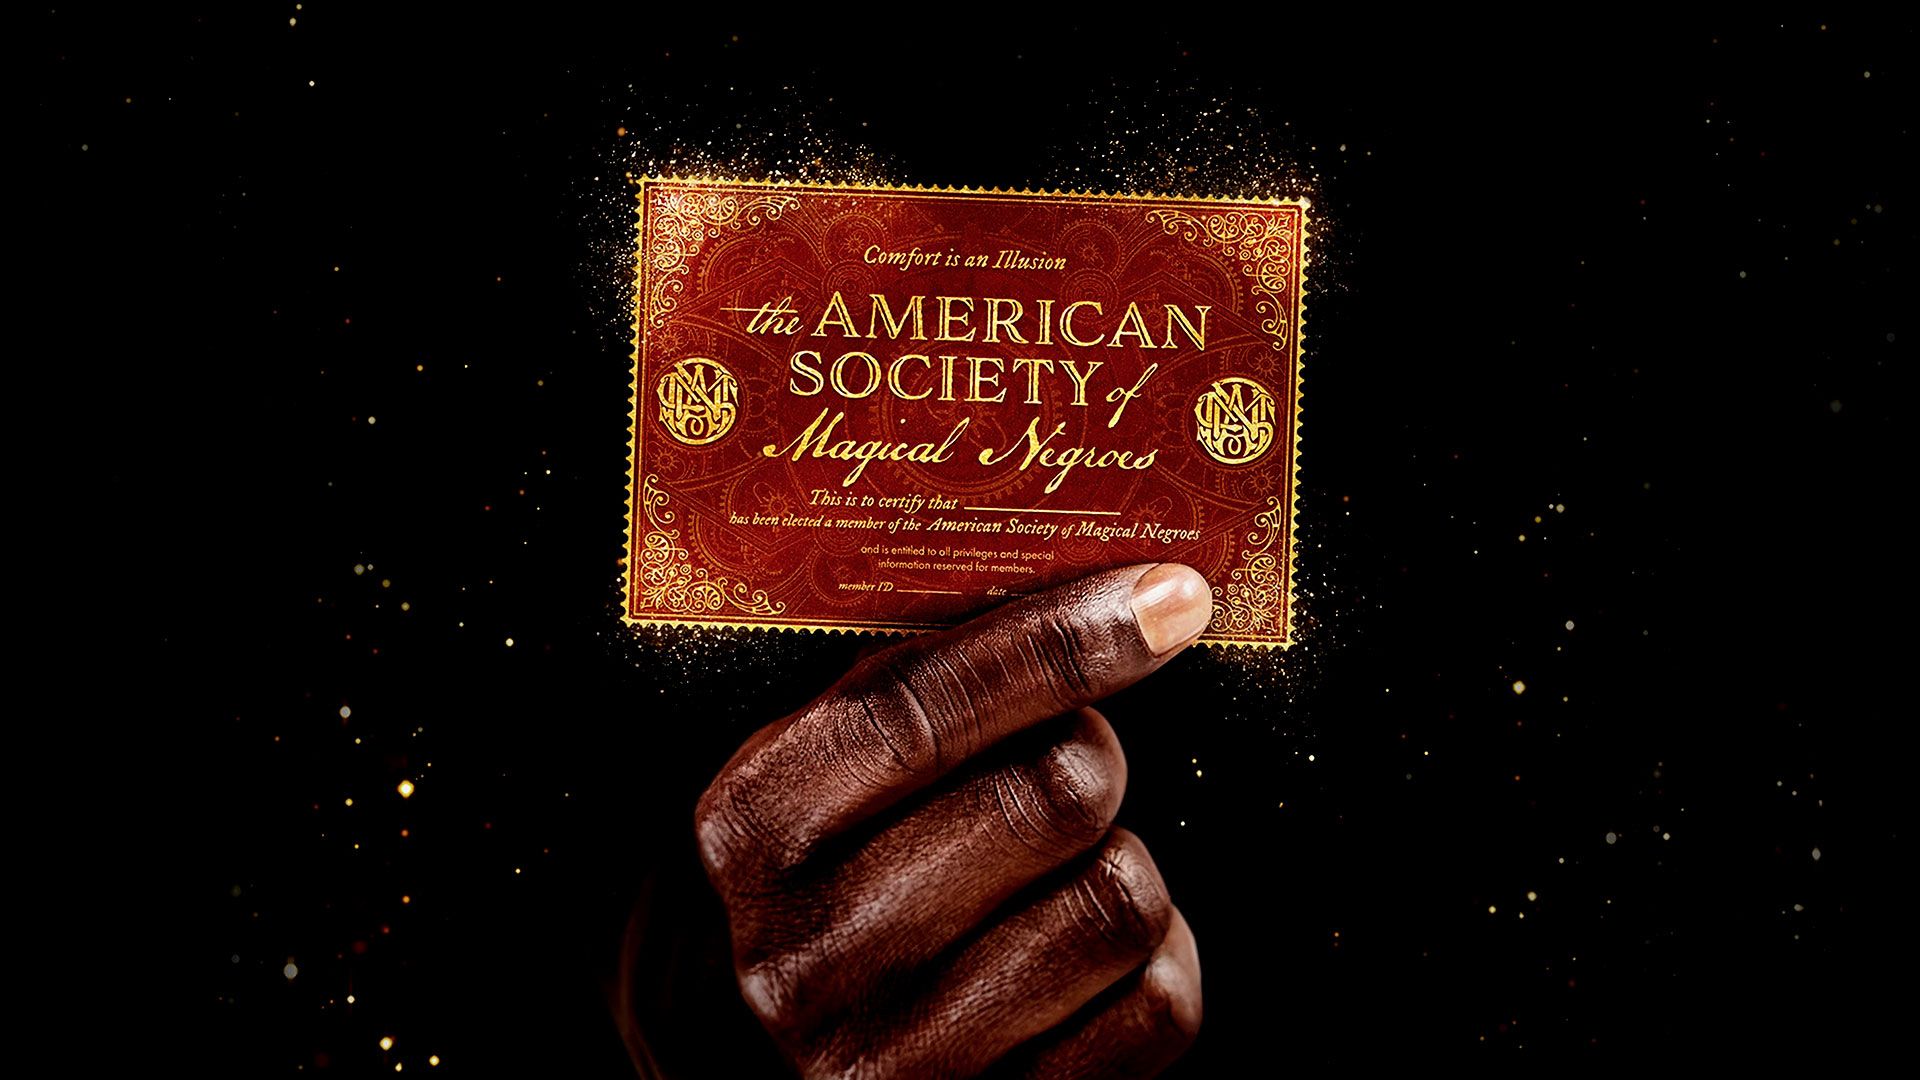 The American Society of Magical Negroes background